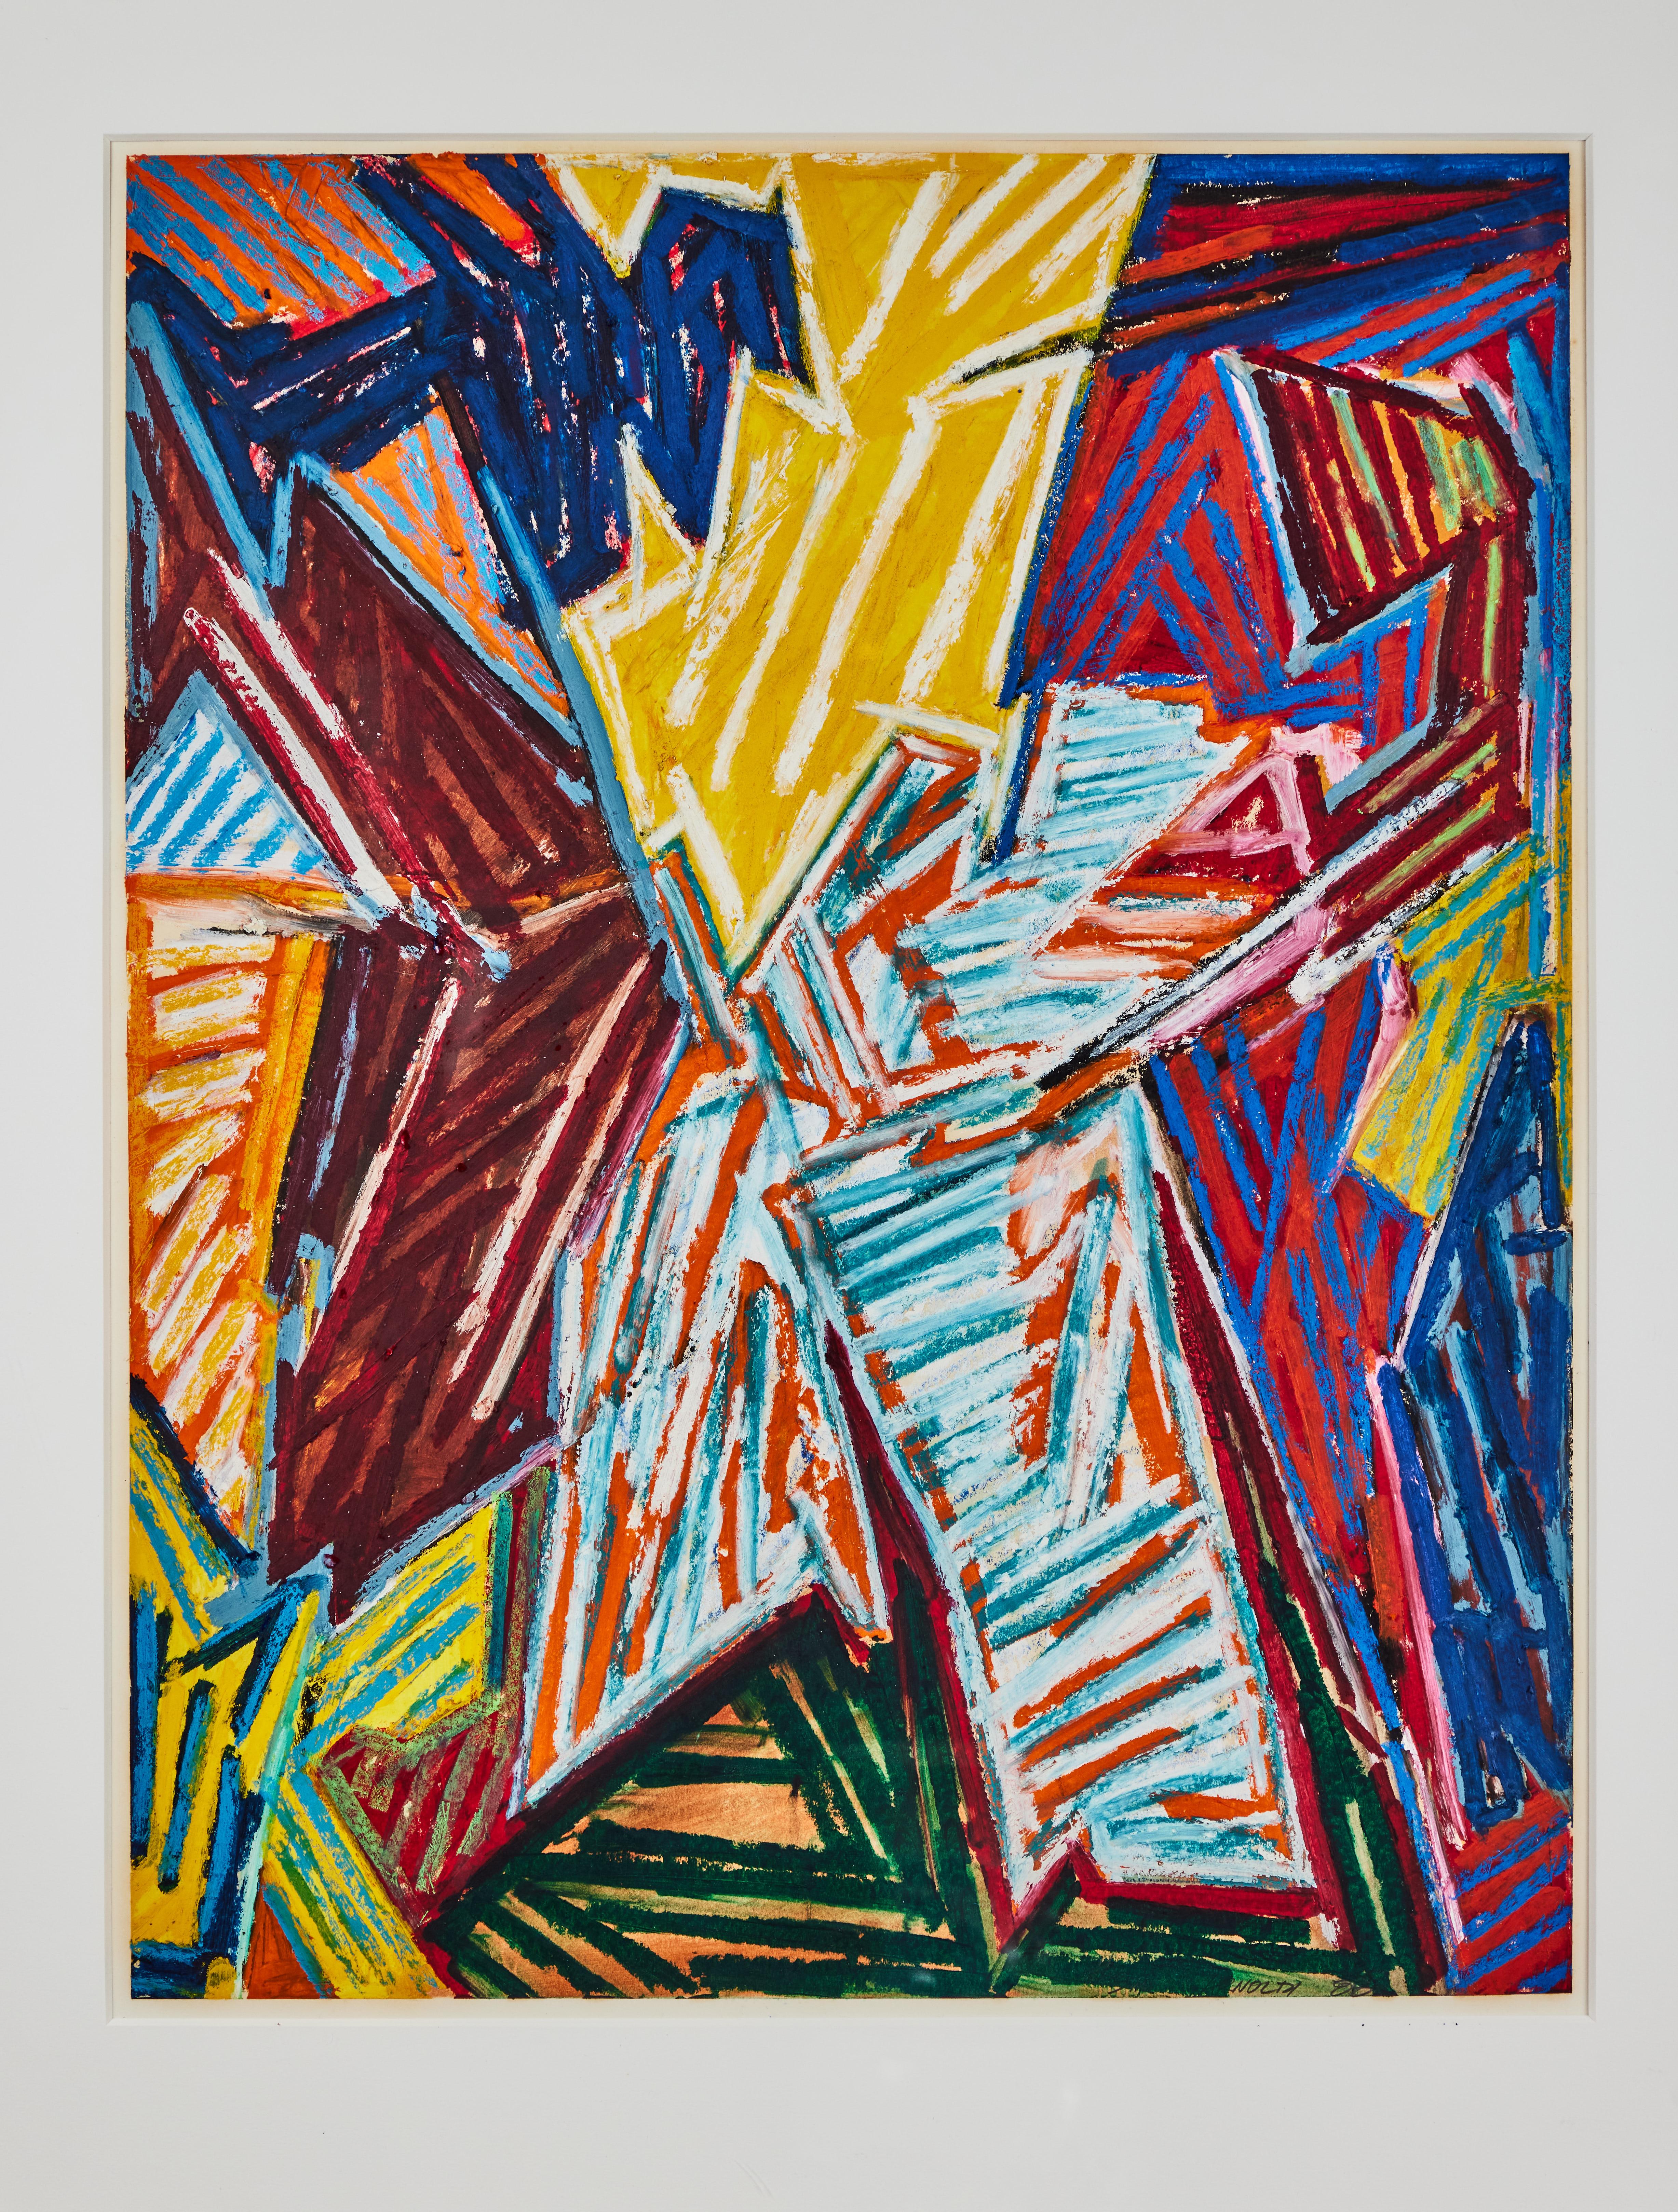 A graphic, vibrant, signed and dated, 1988 acrylic-on-paper artwork by listed, decorated American artist, Charles Arnoldi (b. 1946). Held in a beautiful, silver water gilt frame. Select public collections: Chicago Art Institute, Illinois; Denver Art